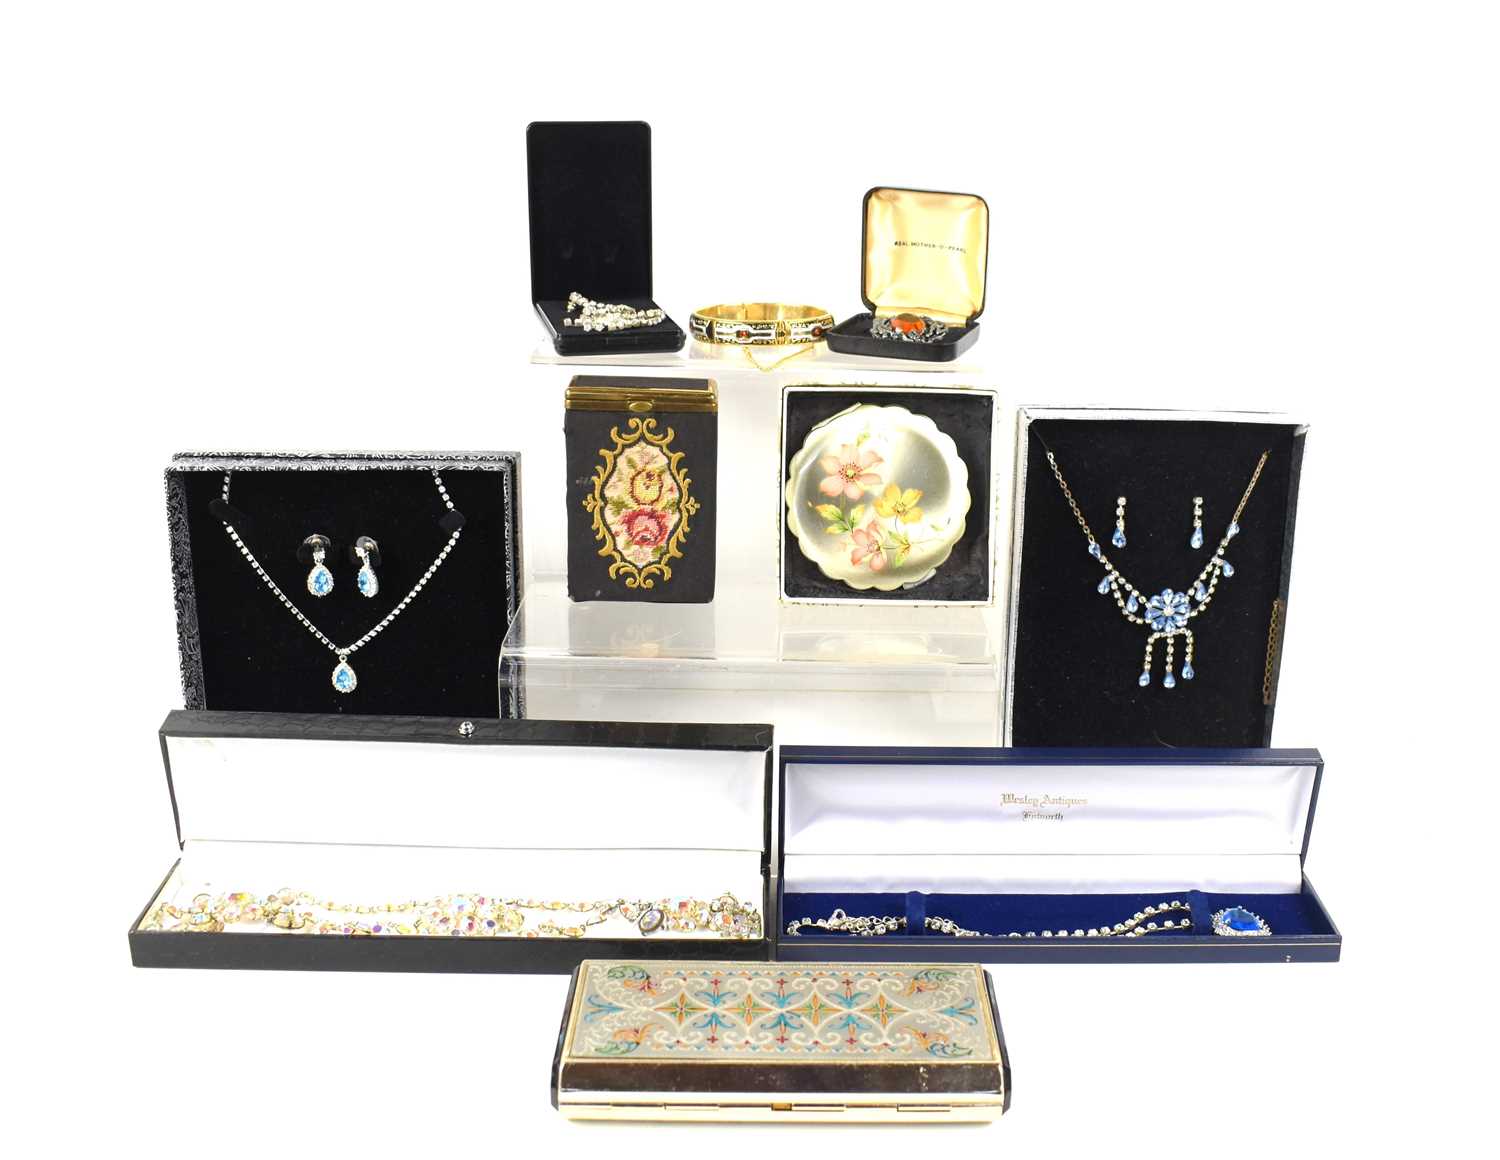 A group of vintage and modern jewellery, along with two compacts and a West Germany cigarette case.